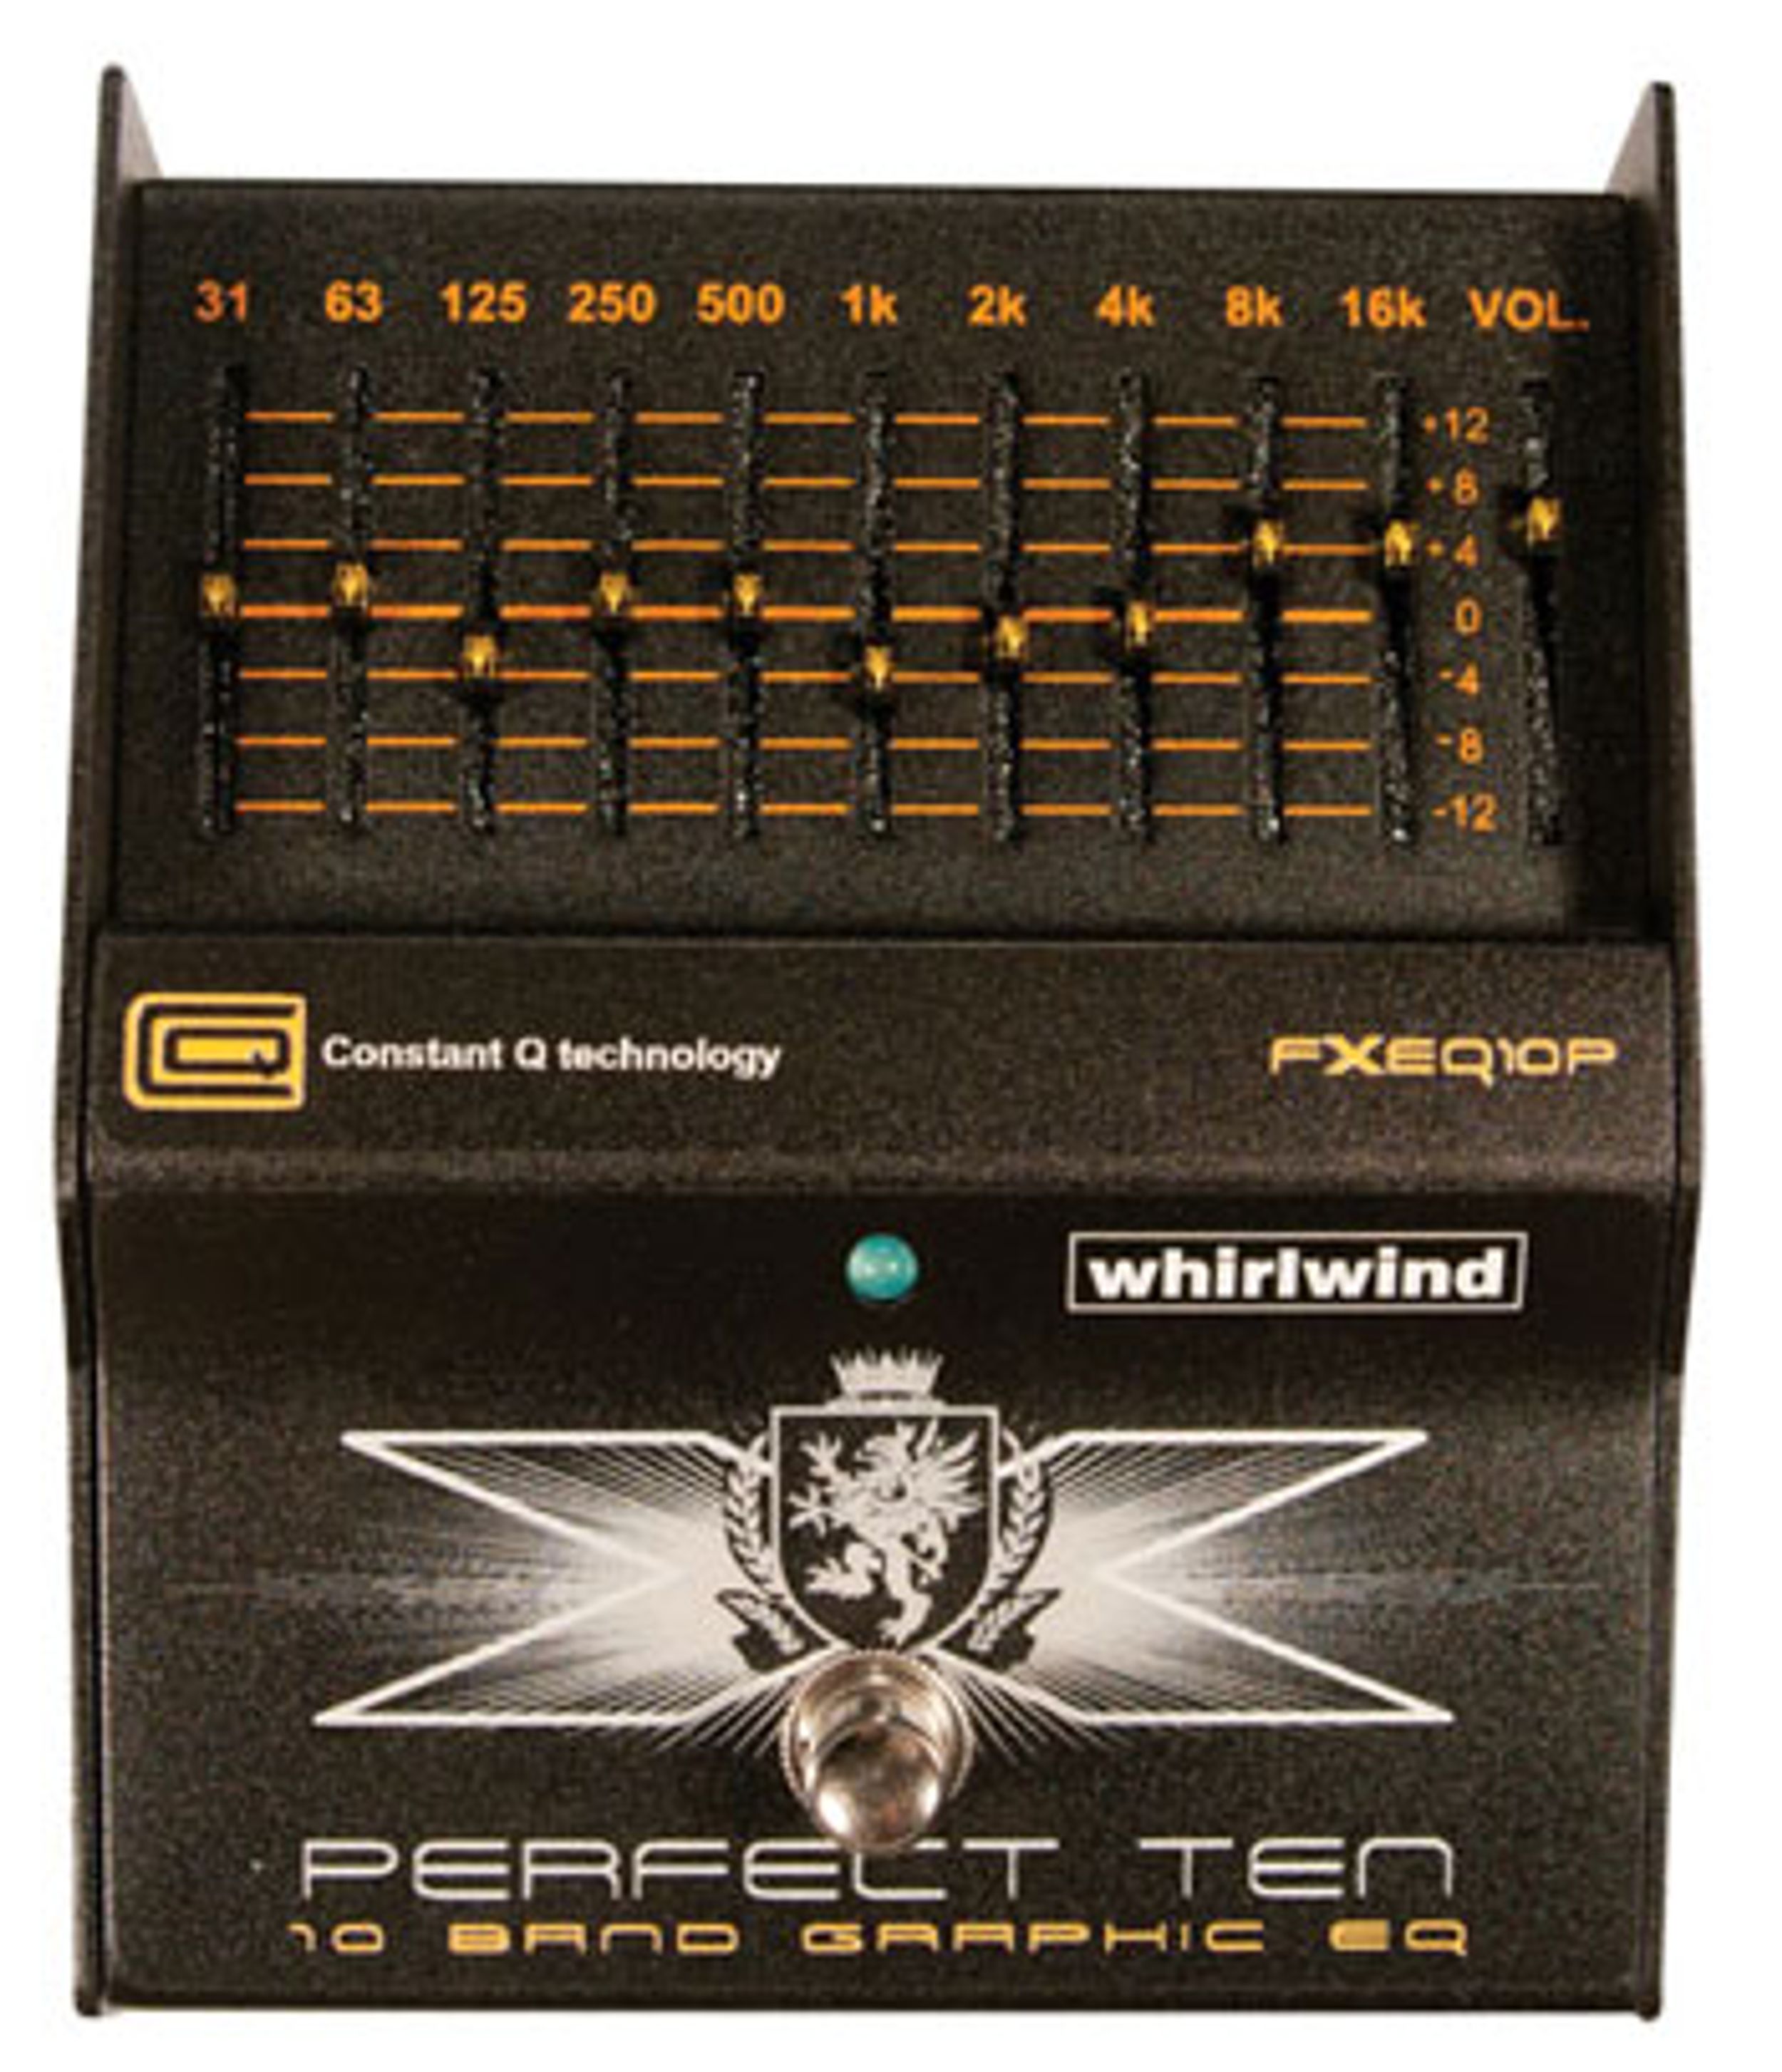 Whirlwind Perfect Ten EQ Pedal Review